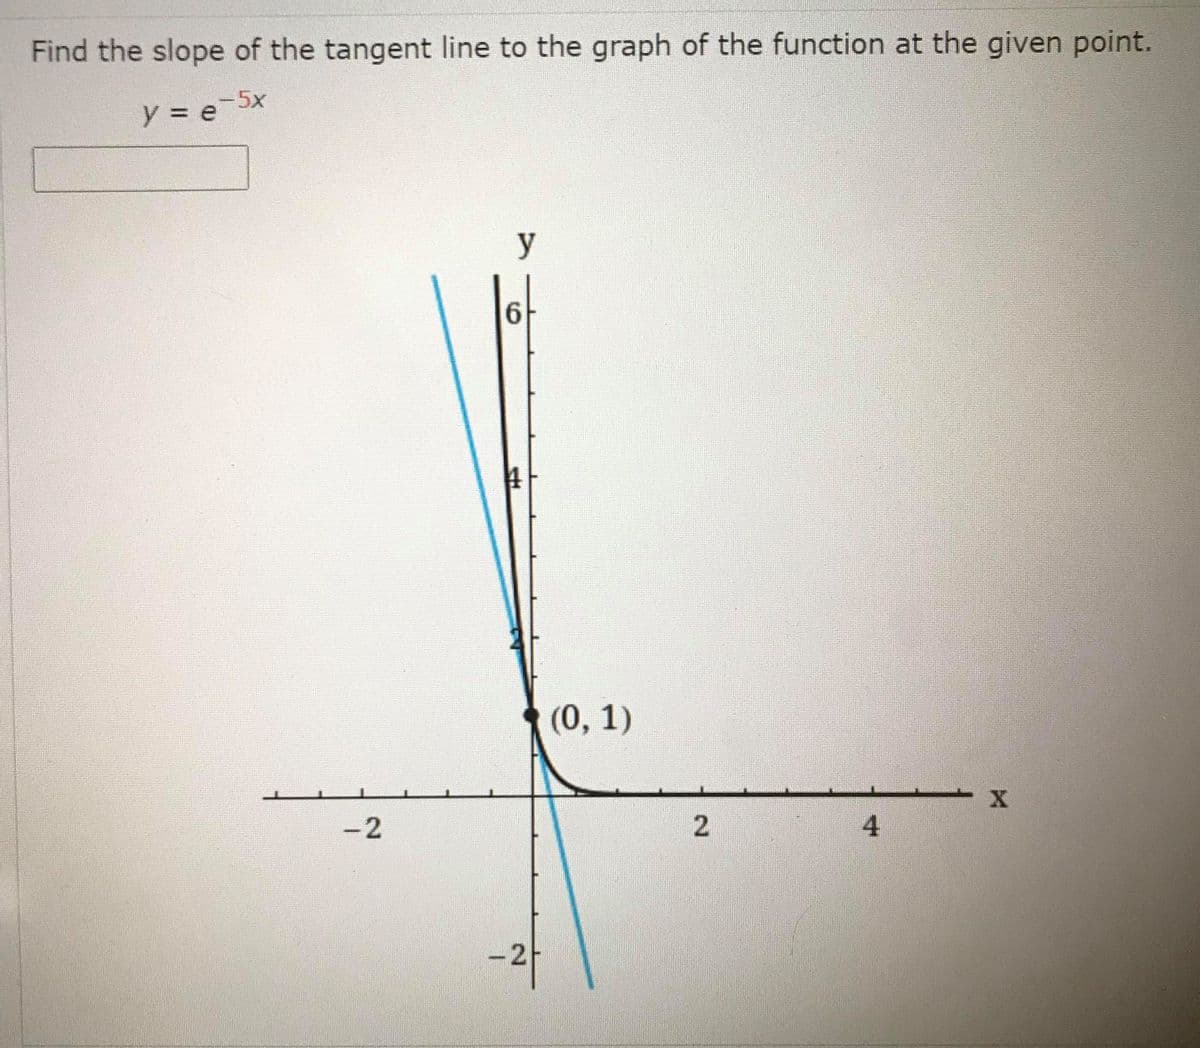 Find the slope of the tangent line to the graph of the function at the given point.
y
6.
(0, 1)
-2
4.
2.
2.
